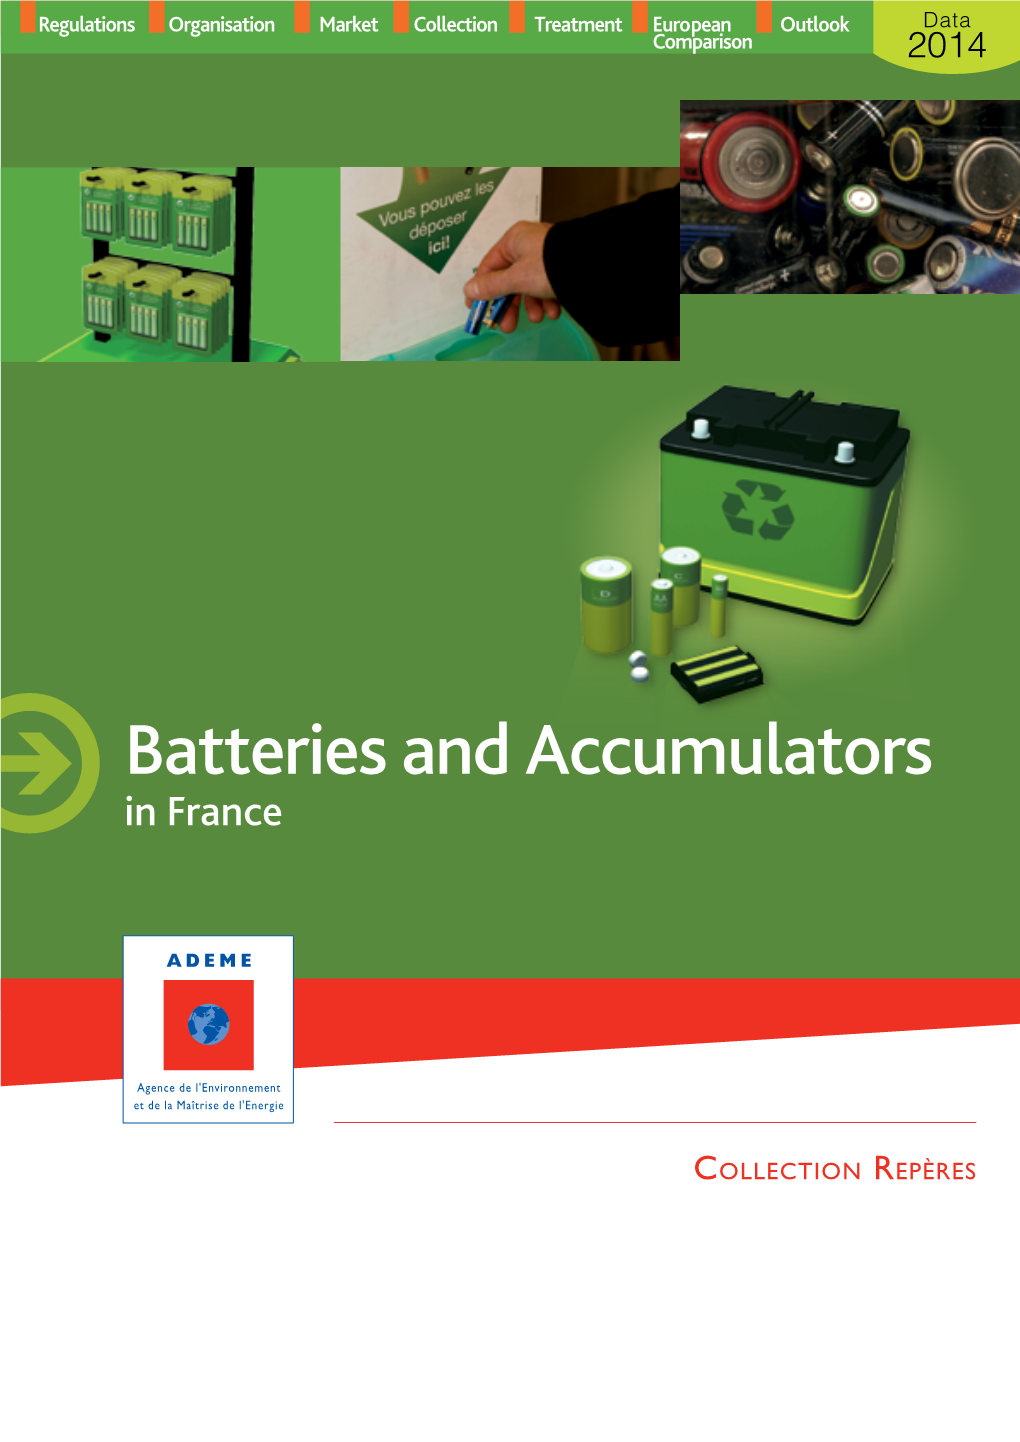 Batteries and Accumulators in France